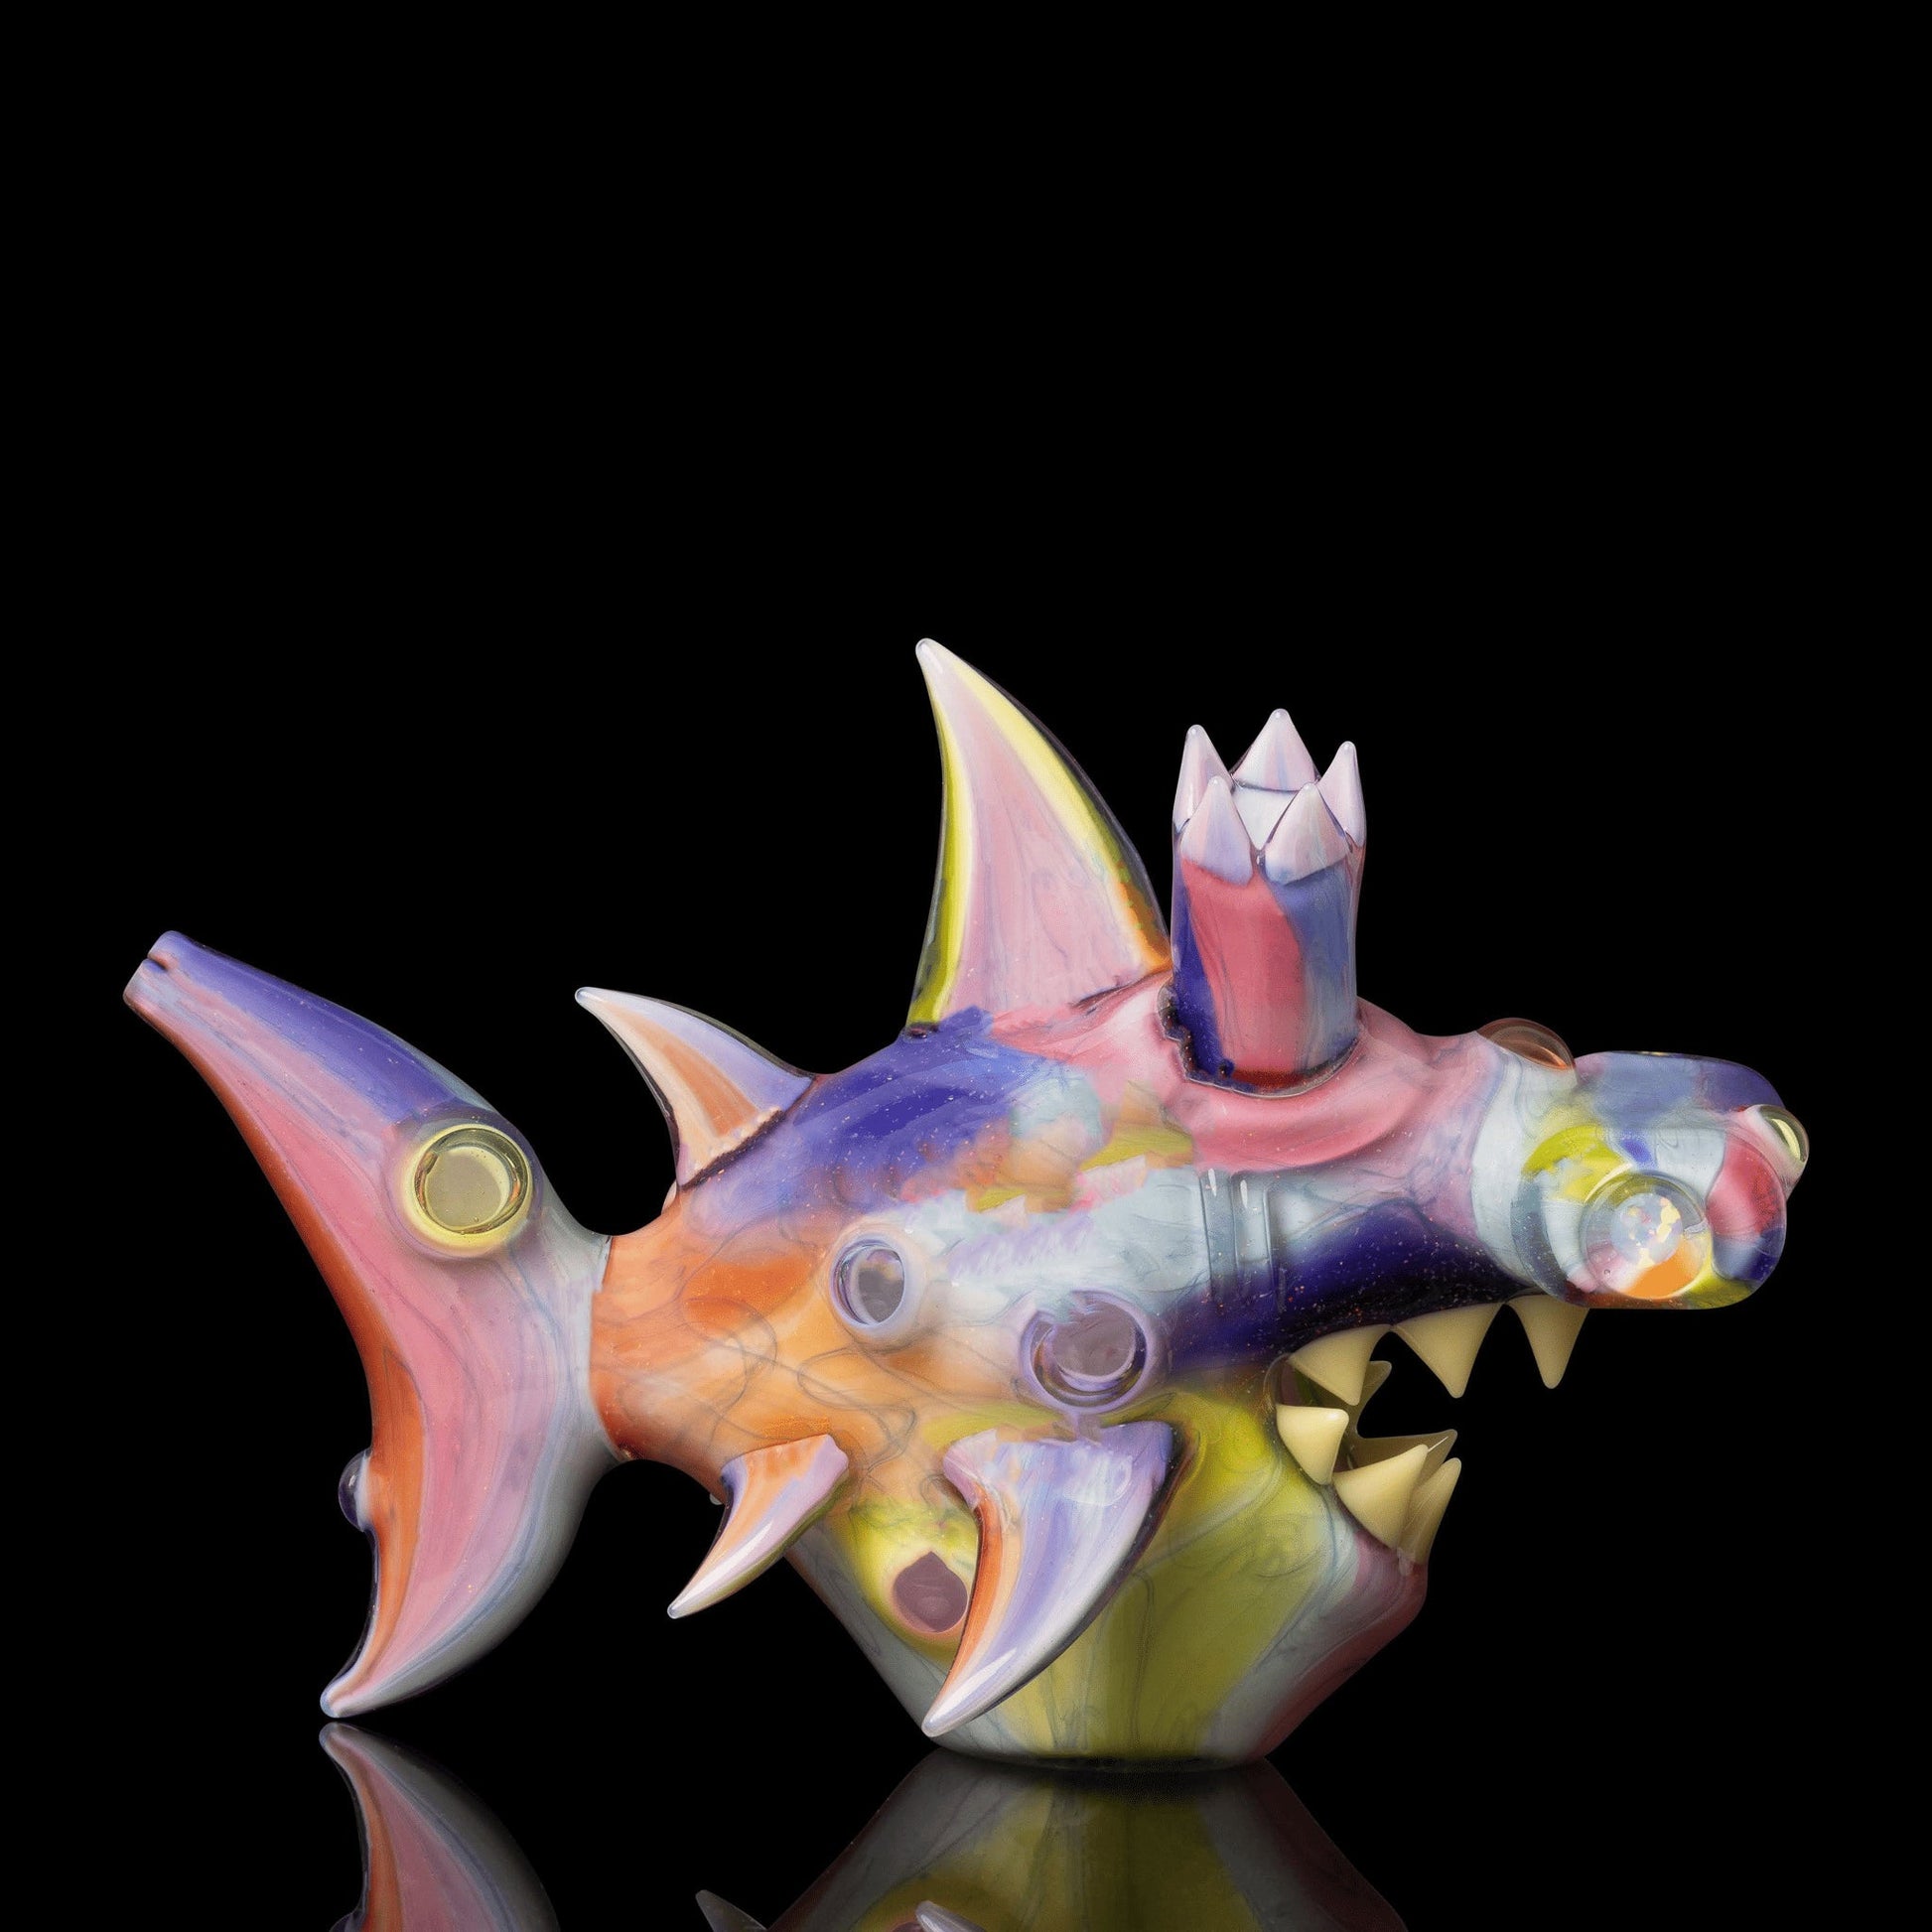 meticulously crafted design of the Collab Shark Rig by Niko Cray x Scomo Moanet (Scribble Season 2022)